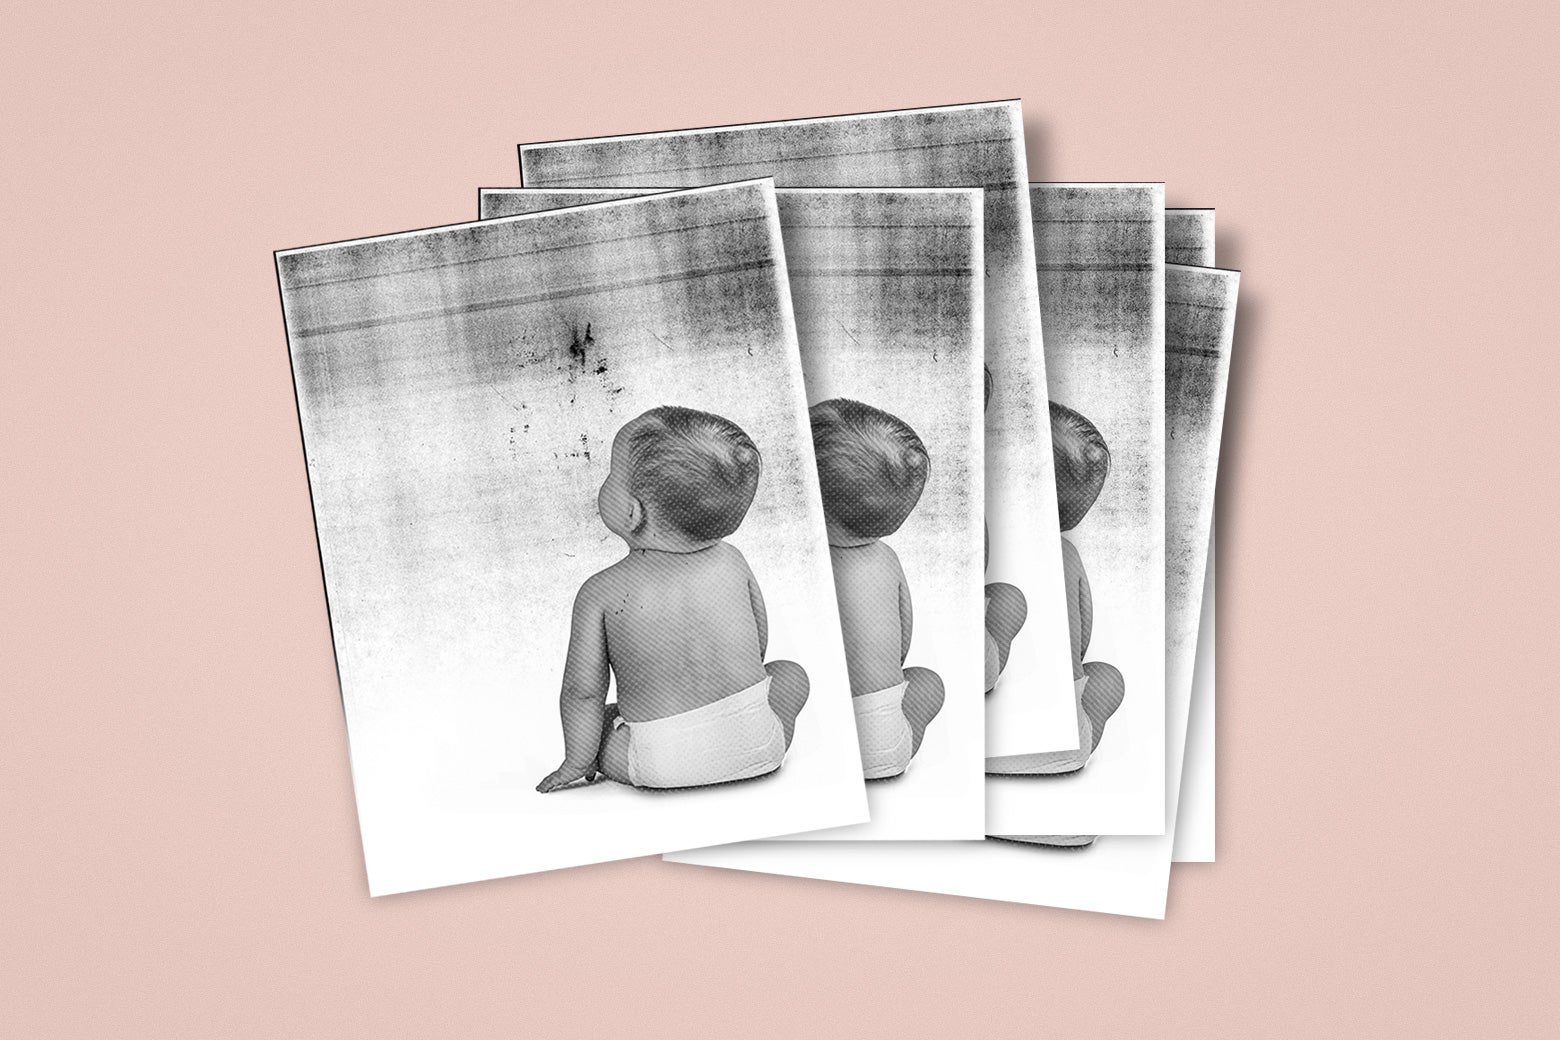 A stack of photocopied images of a baby.